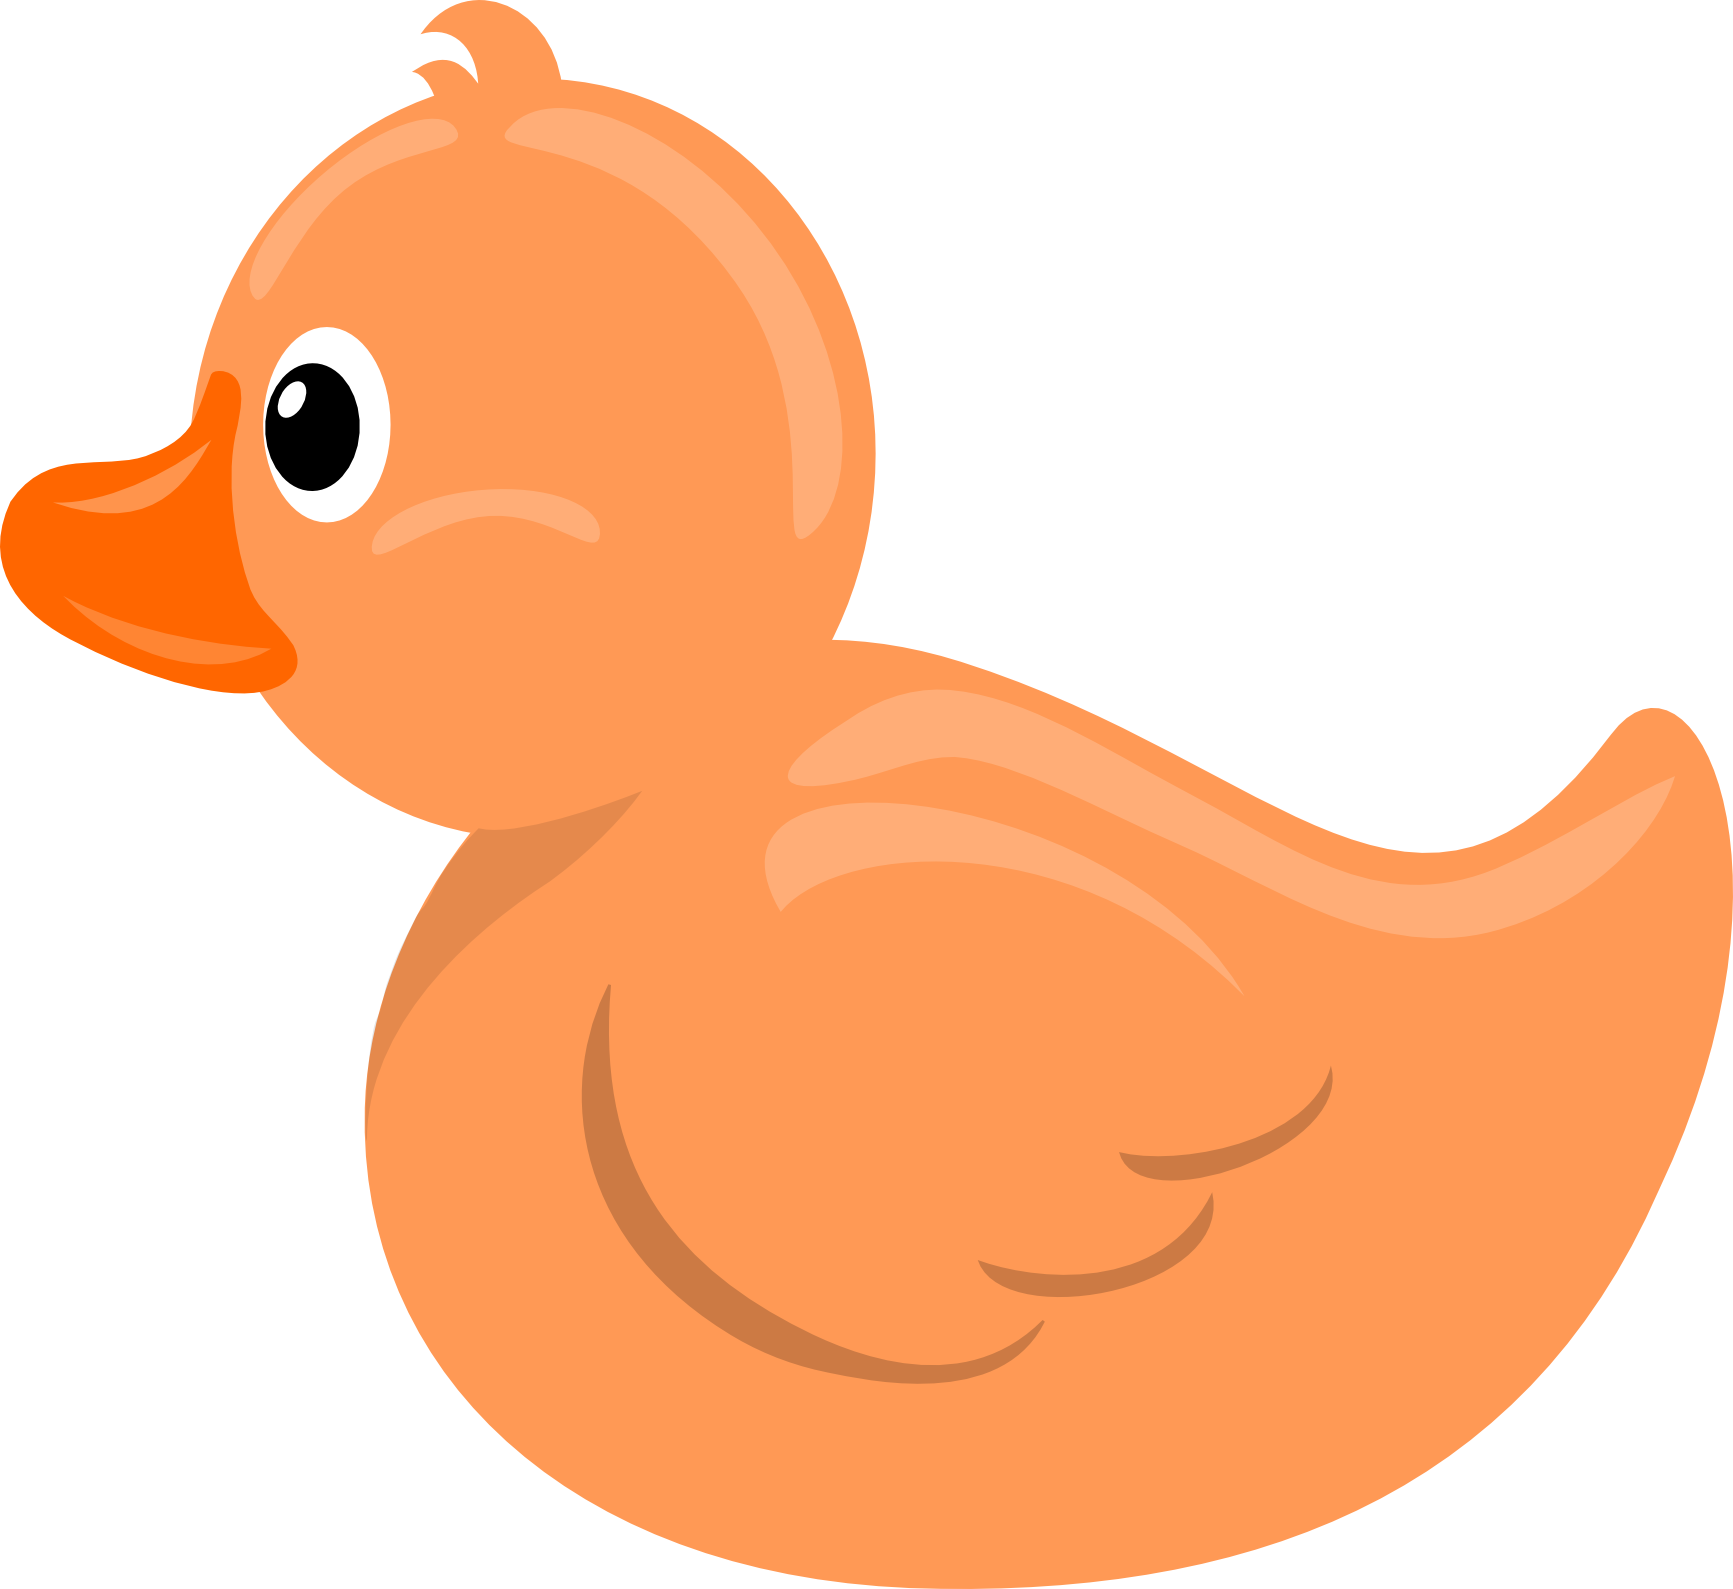 Wet clipart duck. At getdrawings com free